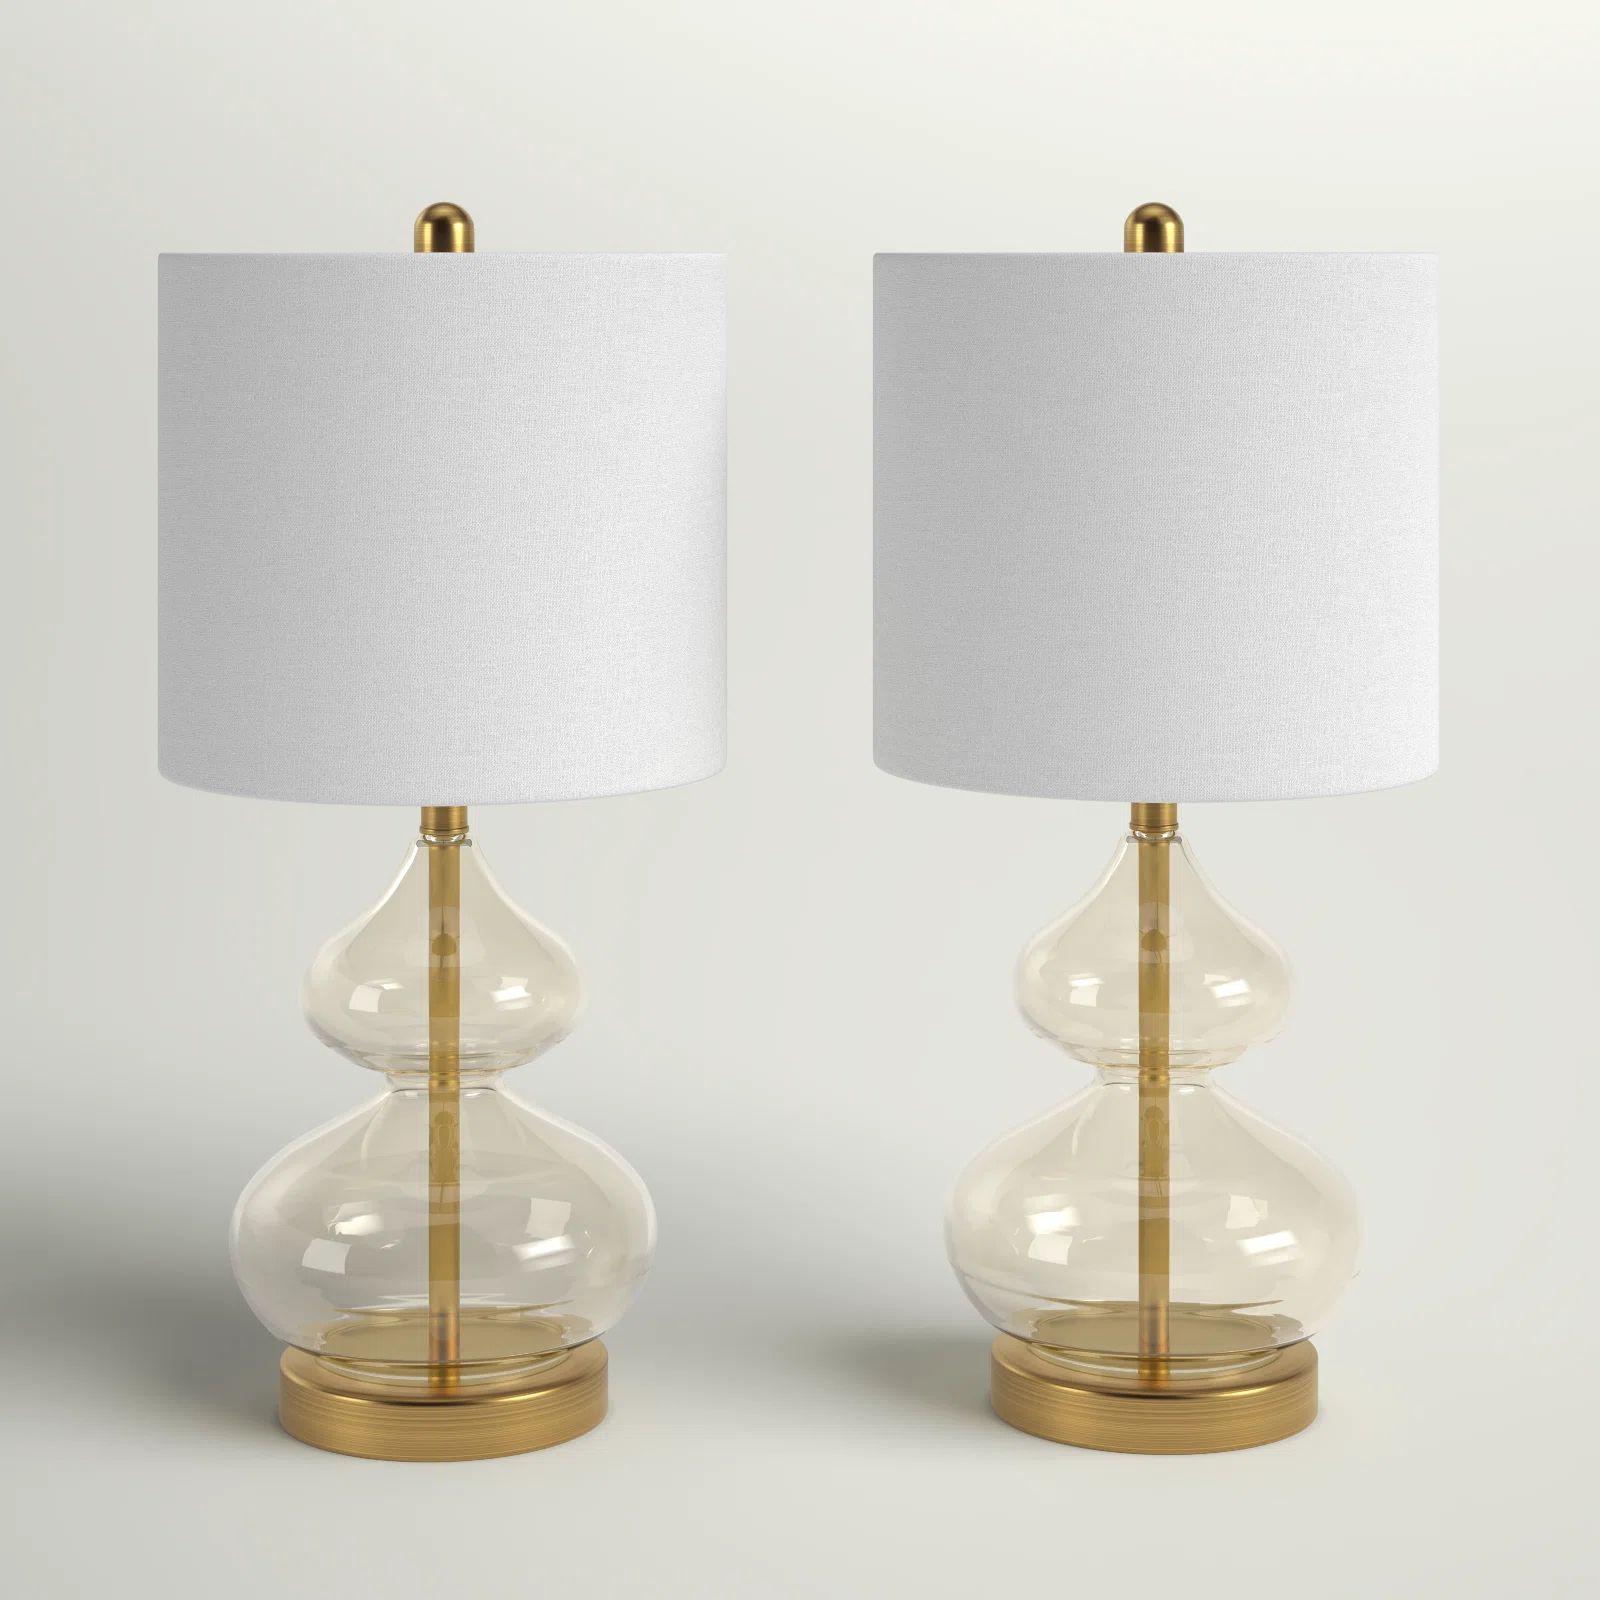 Ayube Tinted Curved Glass Table Lamp | Wayfair North America